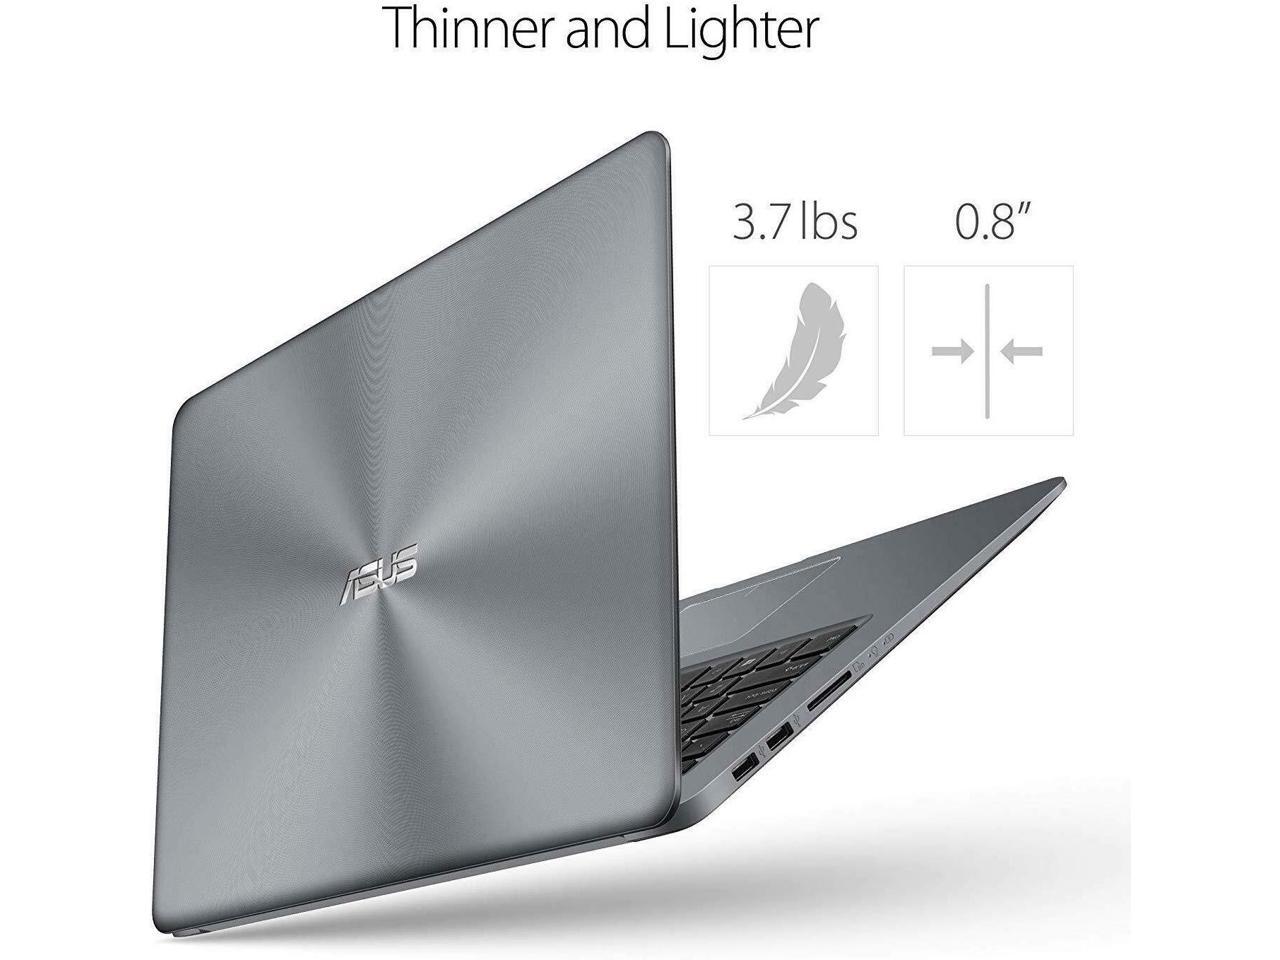 Newest Asus VivoBook Thin & Lightweight Laptop (16G DDR4/128G SSD)|15.6" Full HD(1920x1080) WideView display| AMD Quad Core A12-9720P Processor| Wi-Fi AC|Fingerprint Reader|HDMI |Windows 10 in S Mode